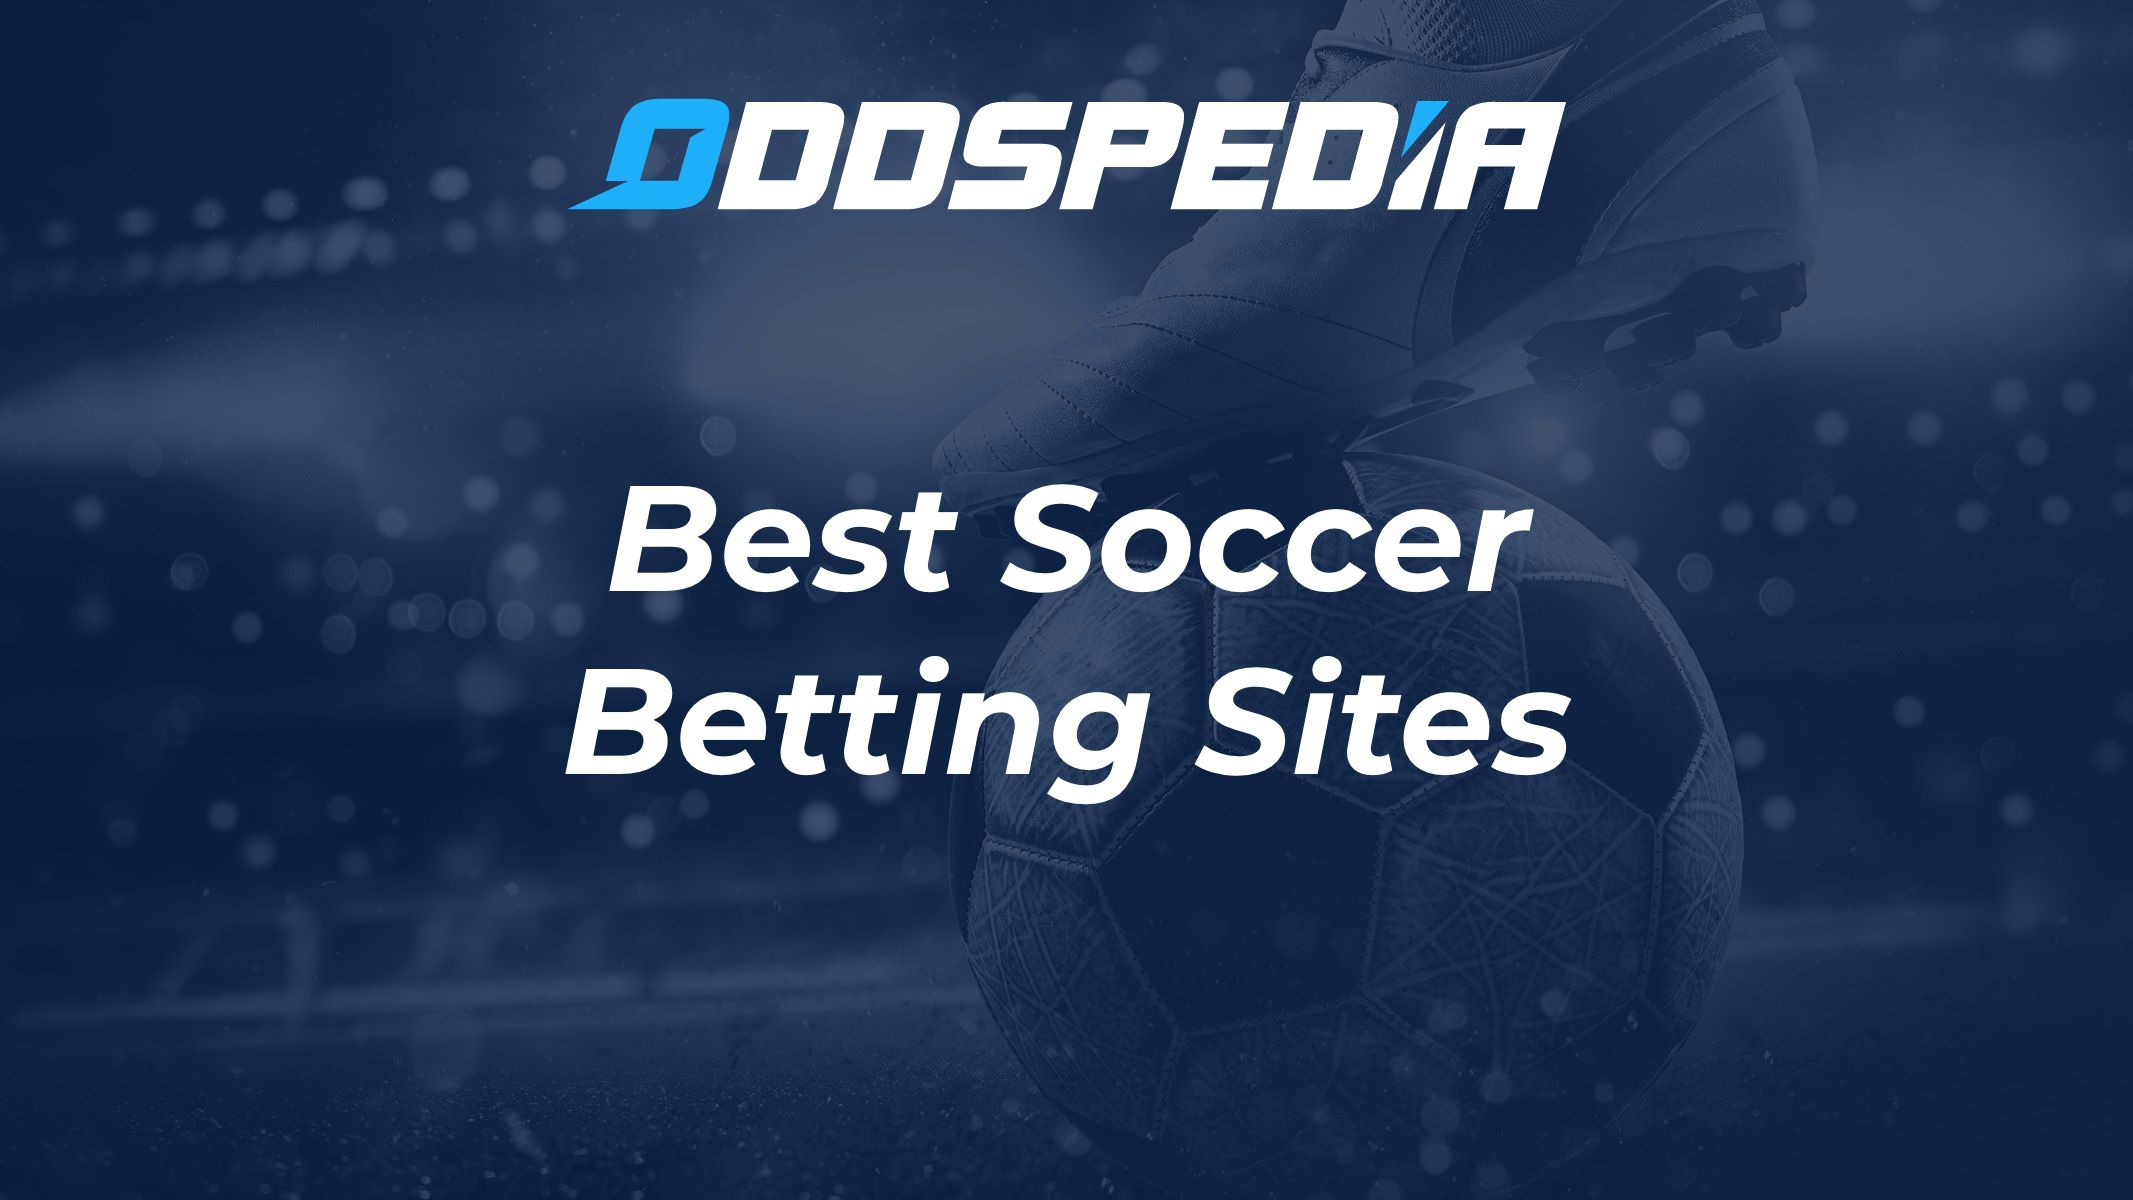 Photo: best soccer betting site usa